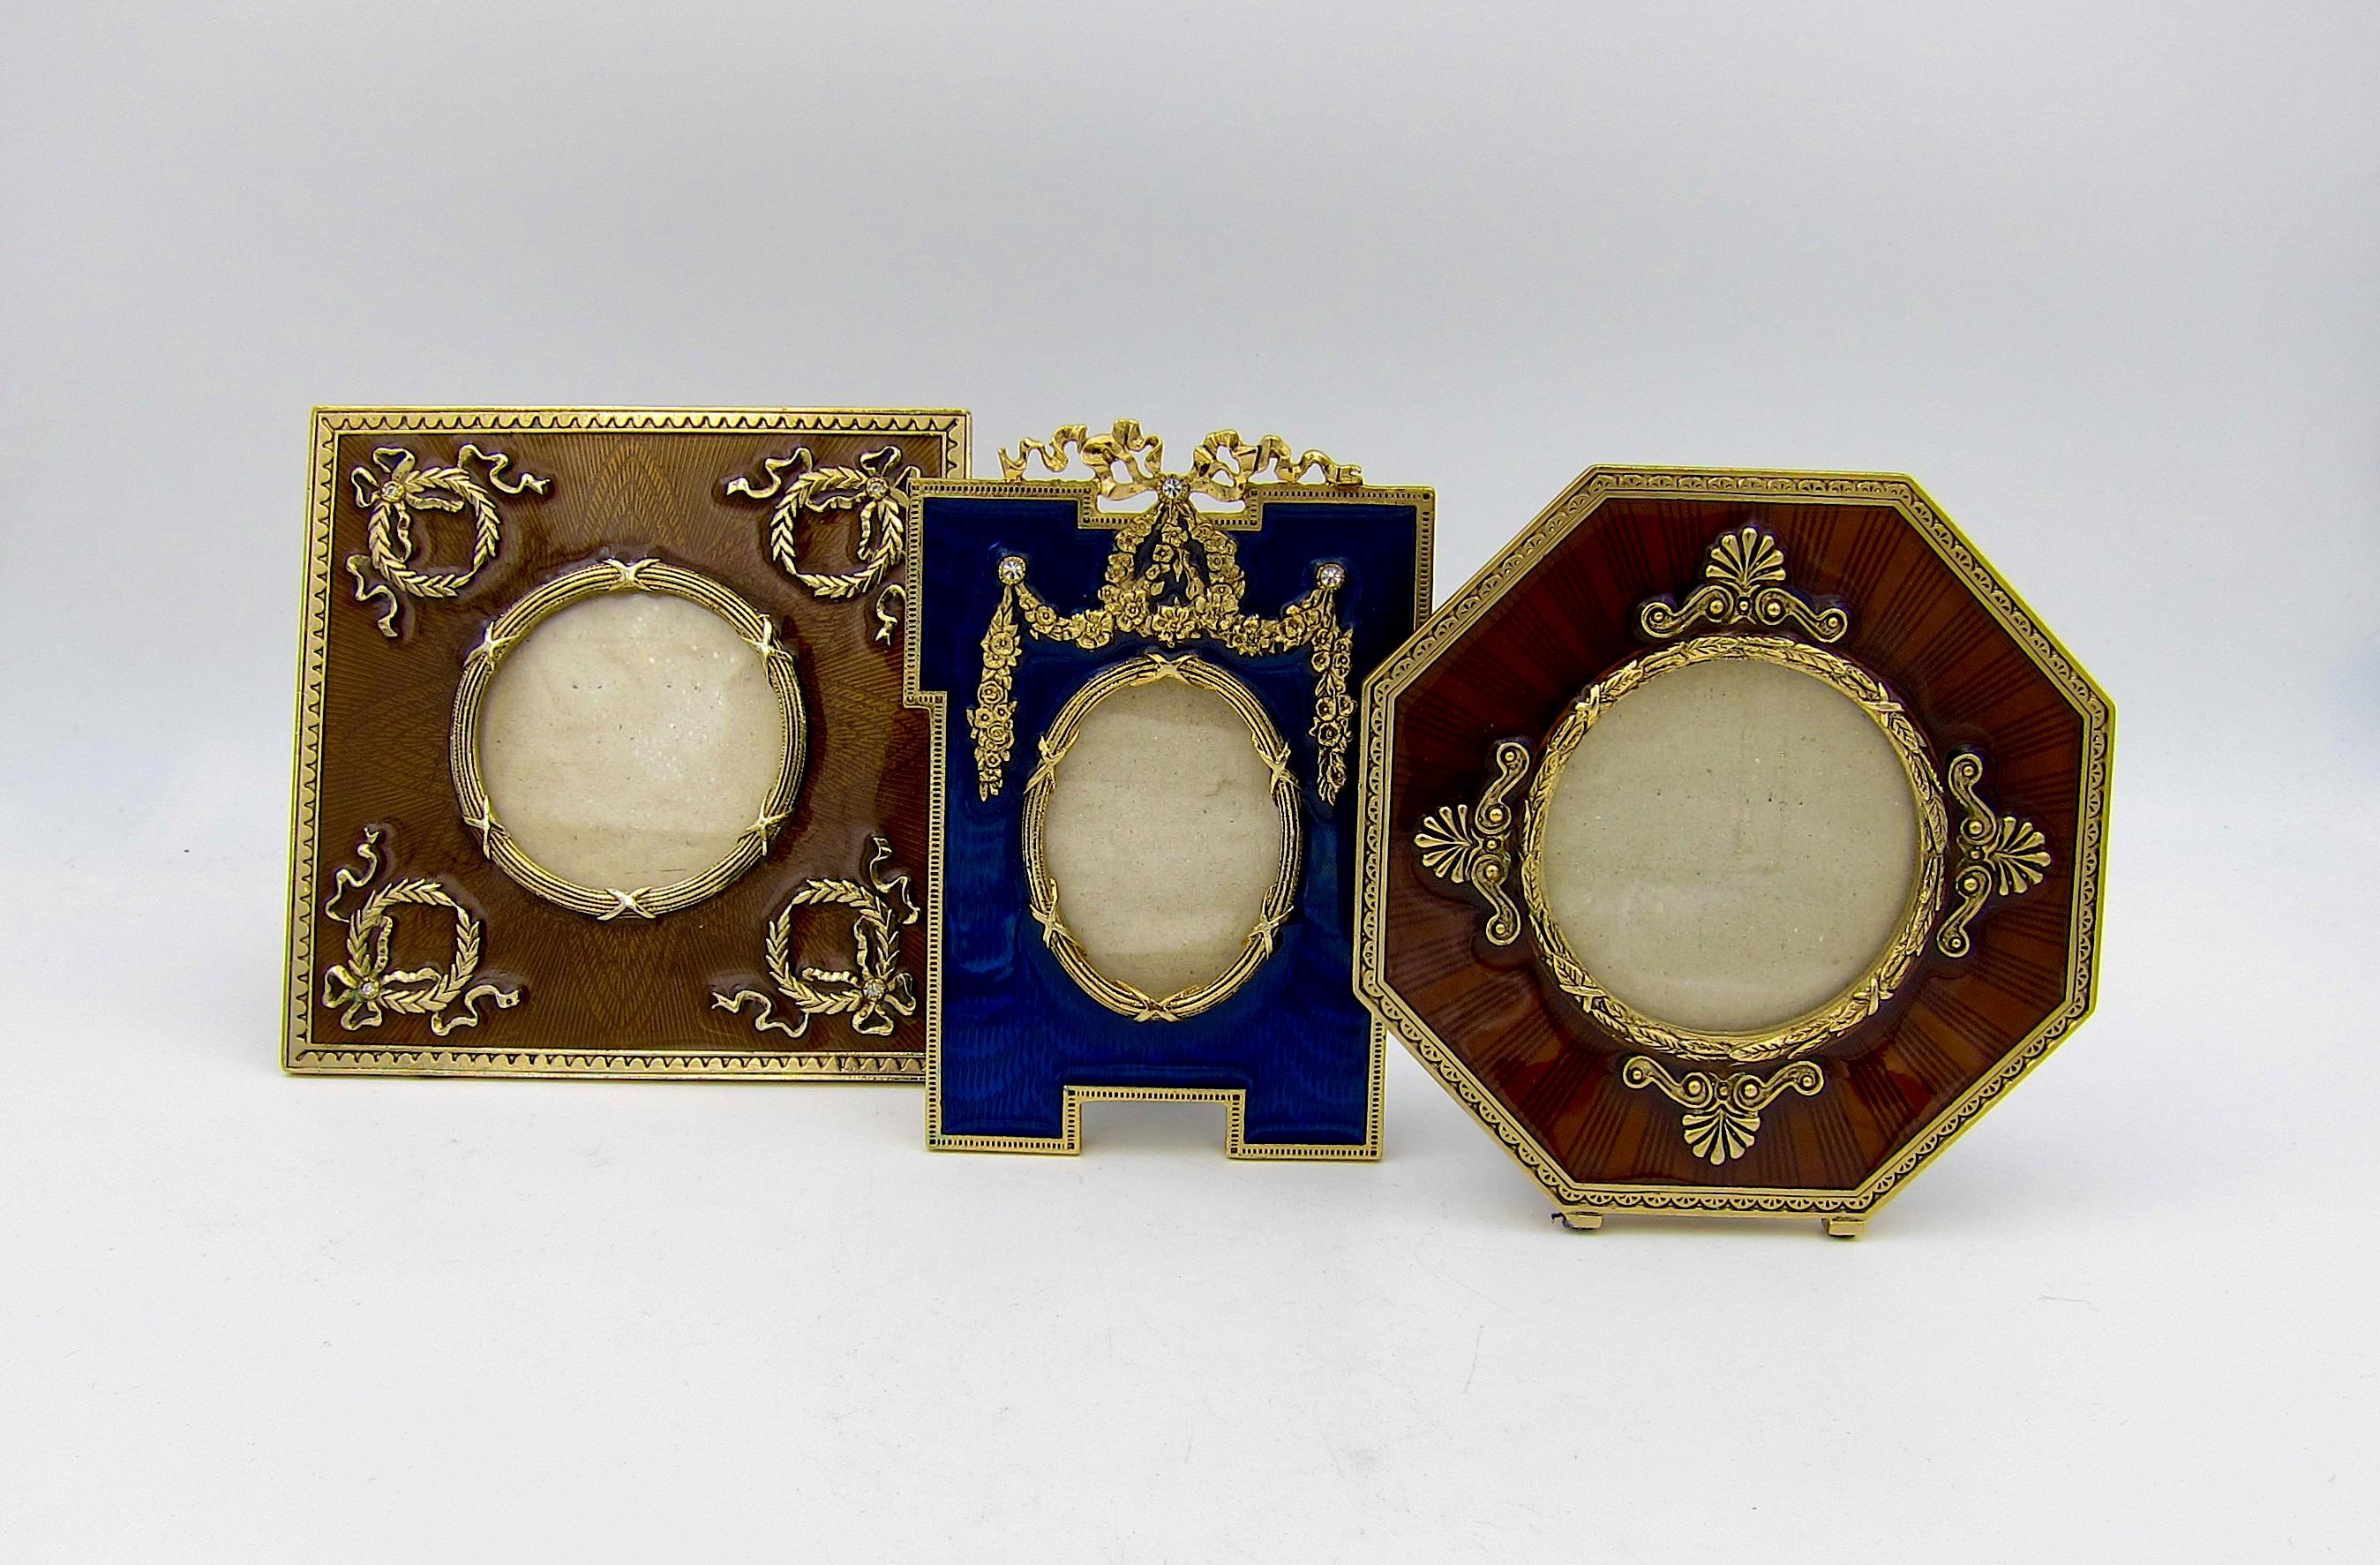 vintage enamel frames and objects